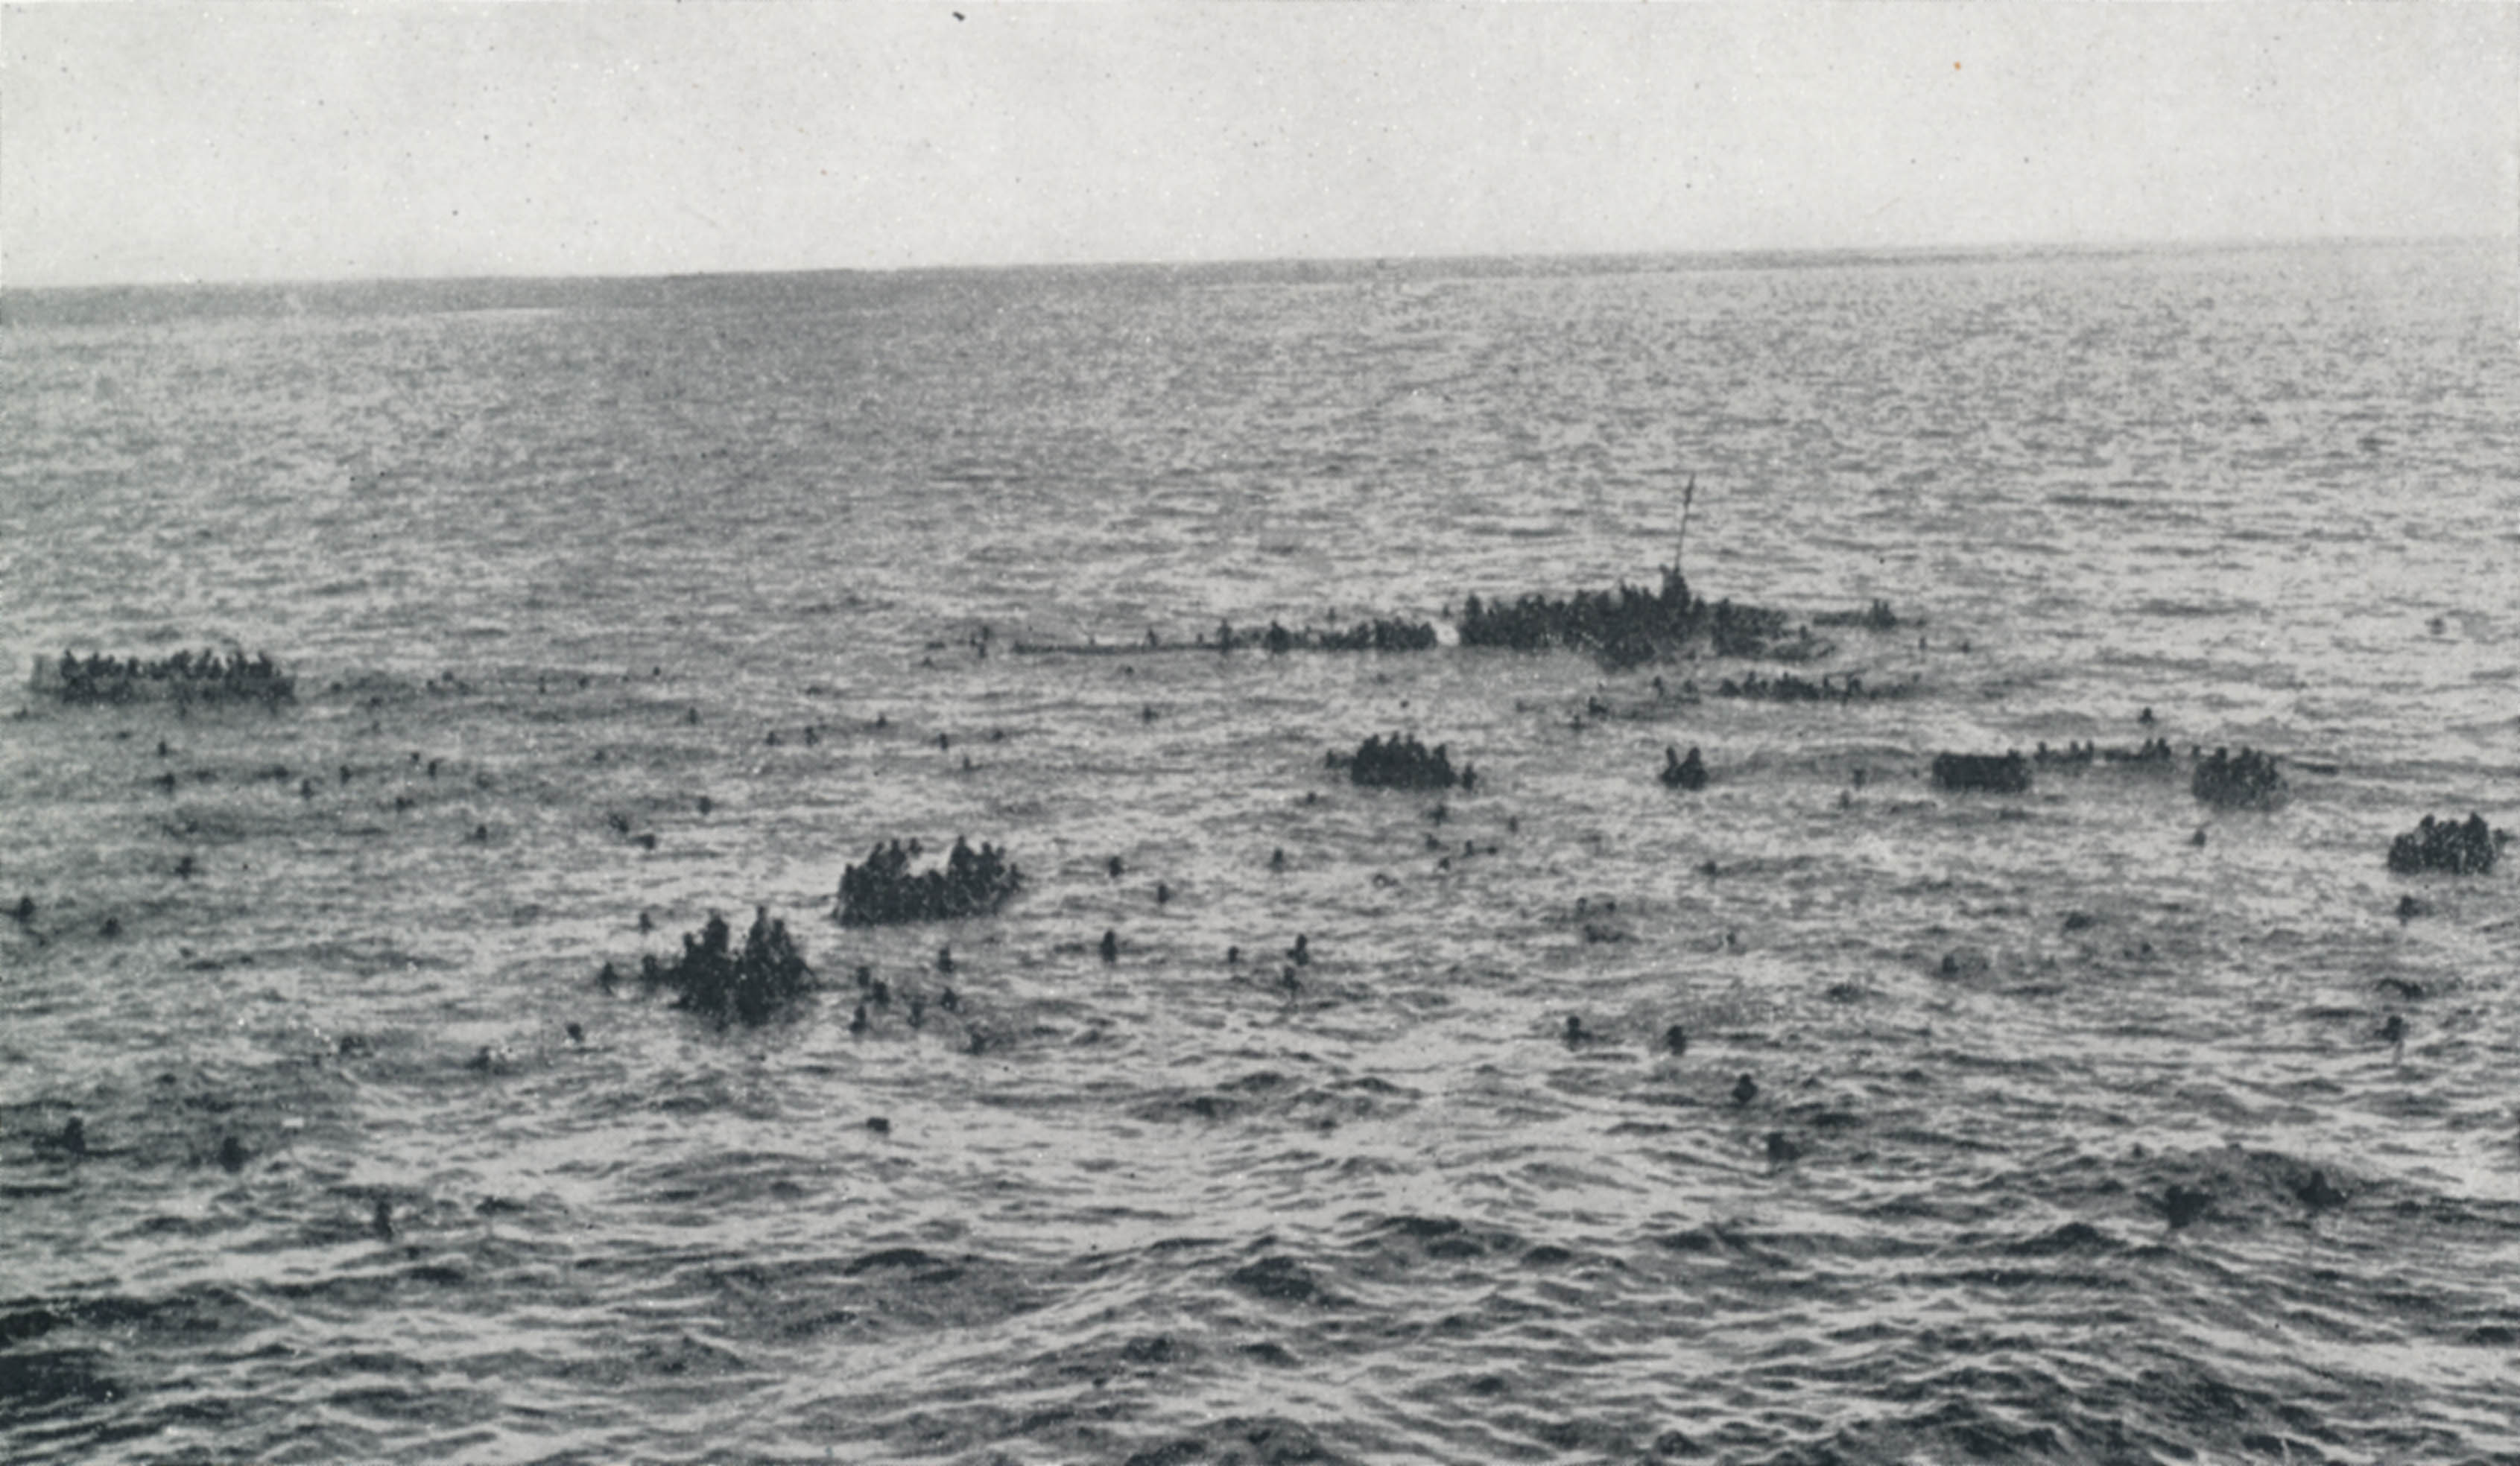 HMS_'Dorsetshire'_survivors_after_sinking_by_Japanese_aircraft_Indian_Ocean